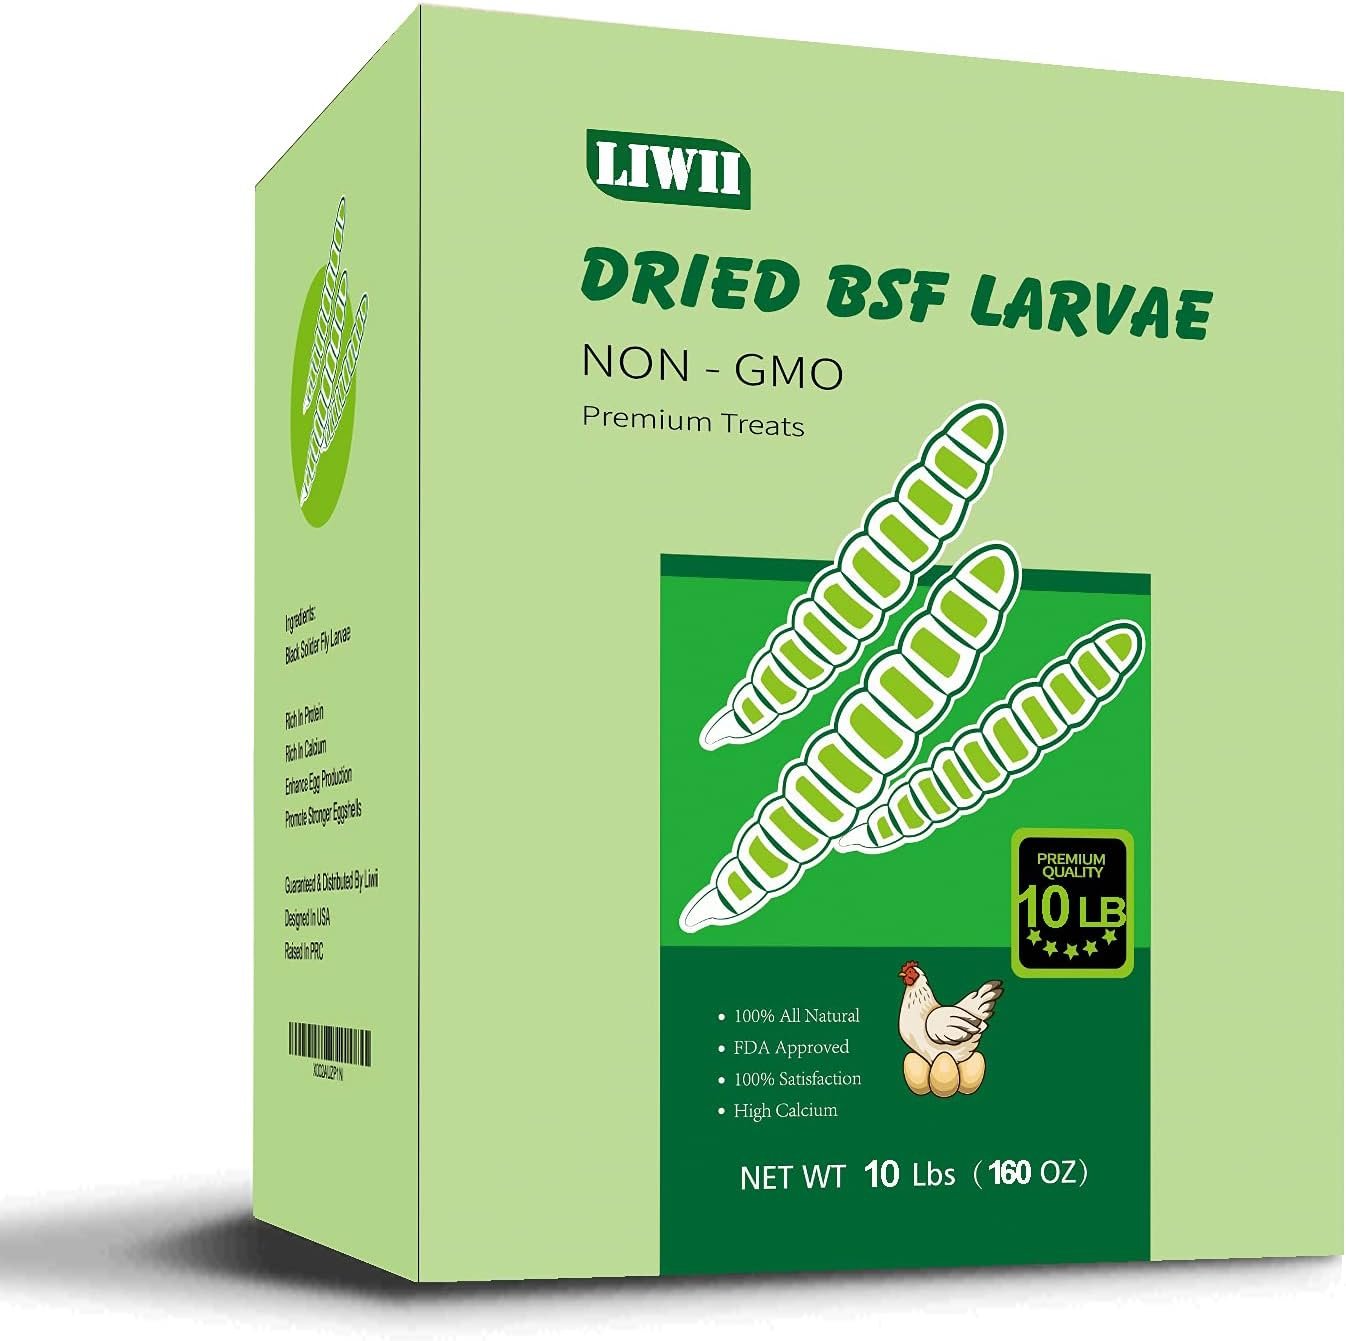 LIWII Dried Black Soldier Fly Larva 10 LBS-100% Natural Non-GMO Extra Calcium  Protein Compare with Dried Mealworms, Chicken Treats, Bearded Dragon Food, Wild Birds, Hedgehog, Turtles, Reptile Food